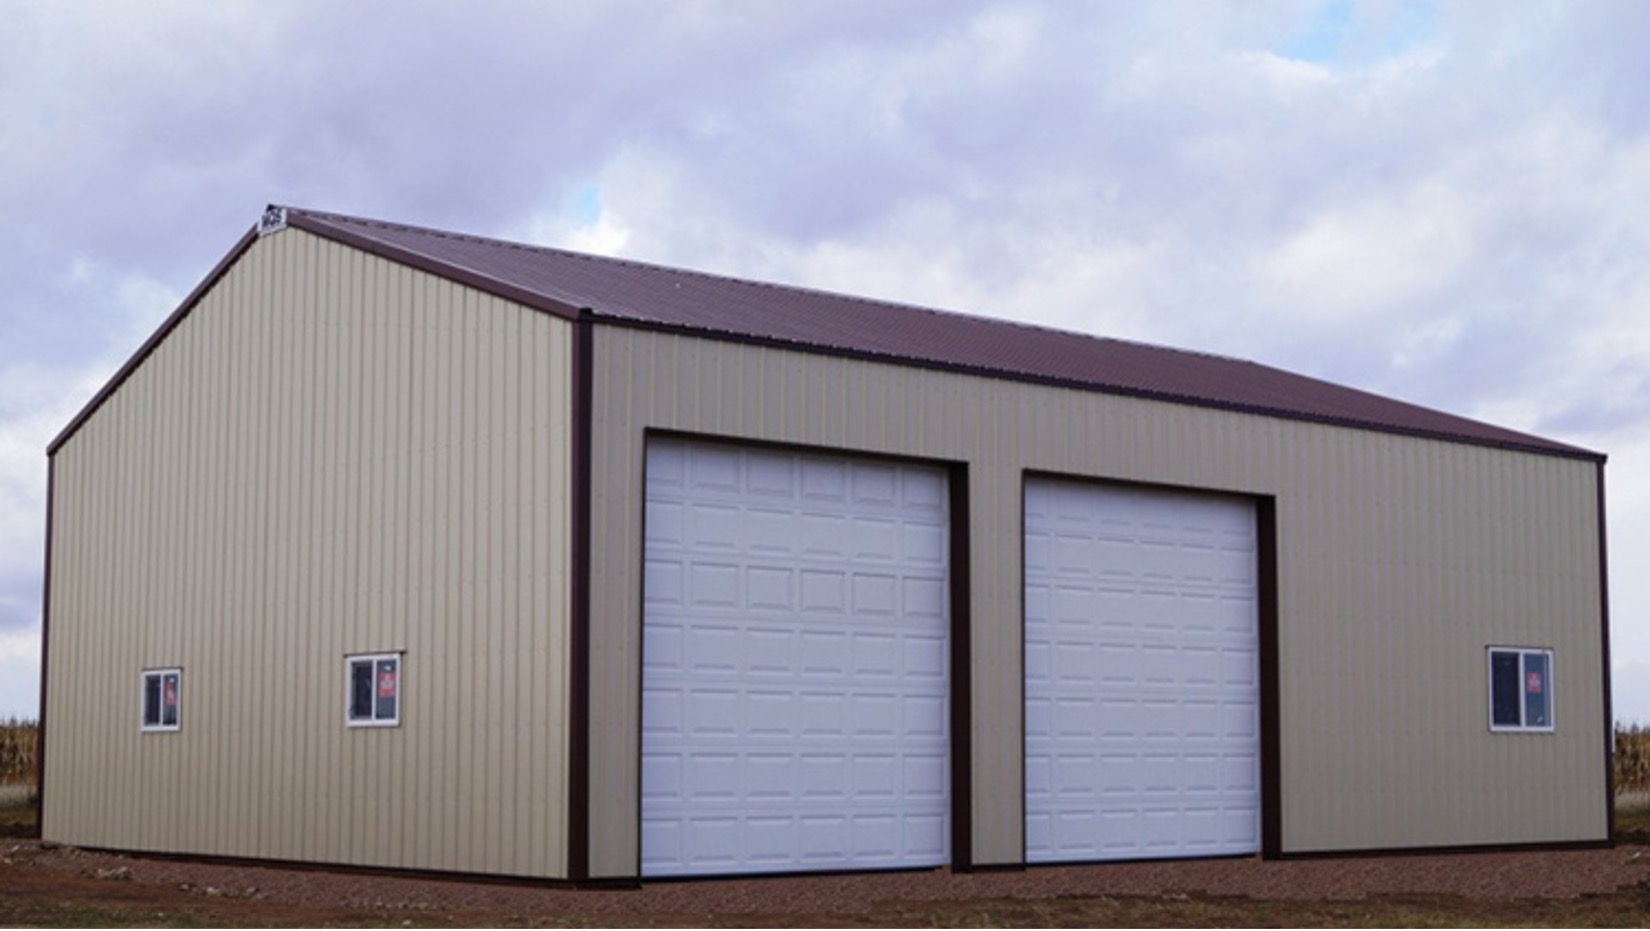 9 Thrifty Tips to Save Money on Your New Garage in Montana